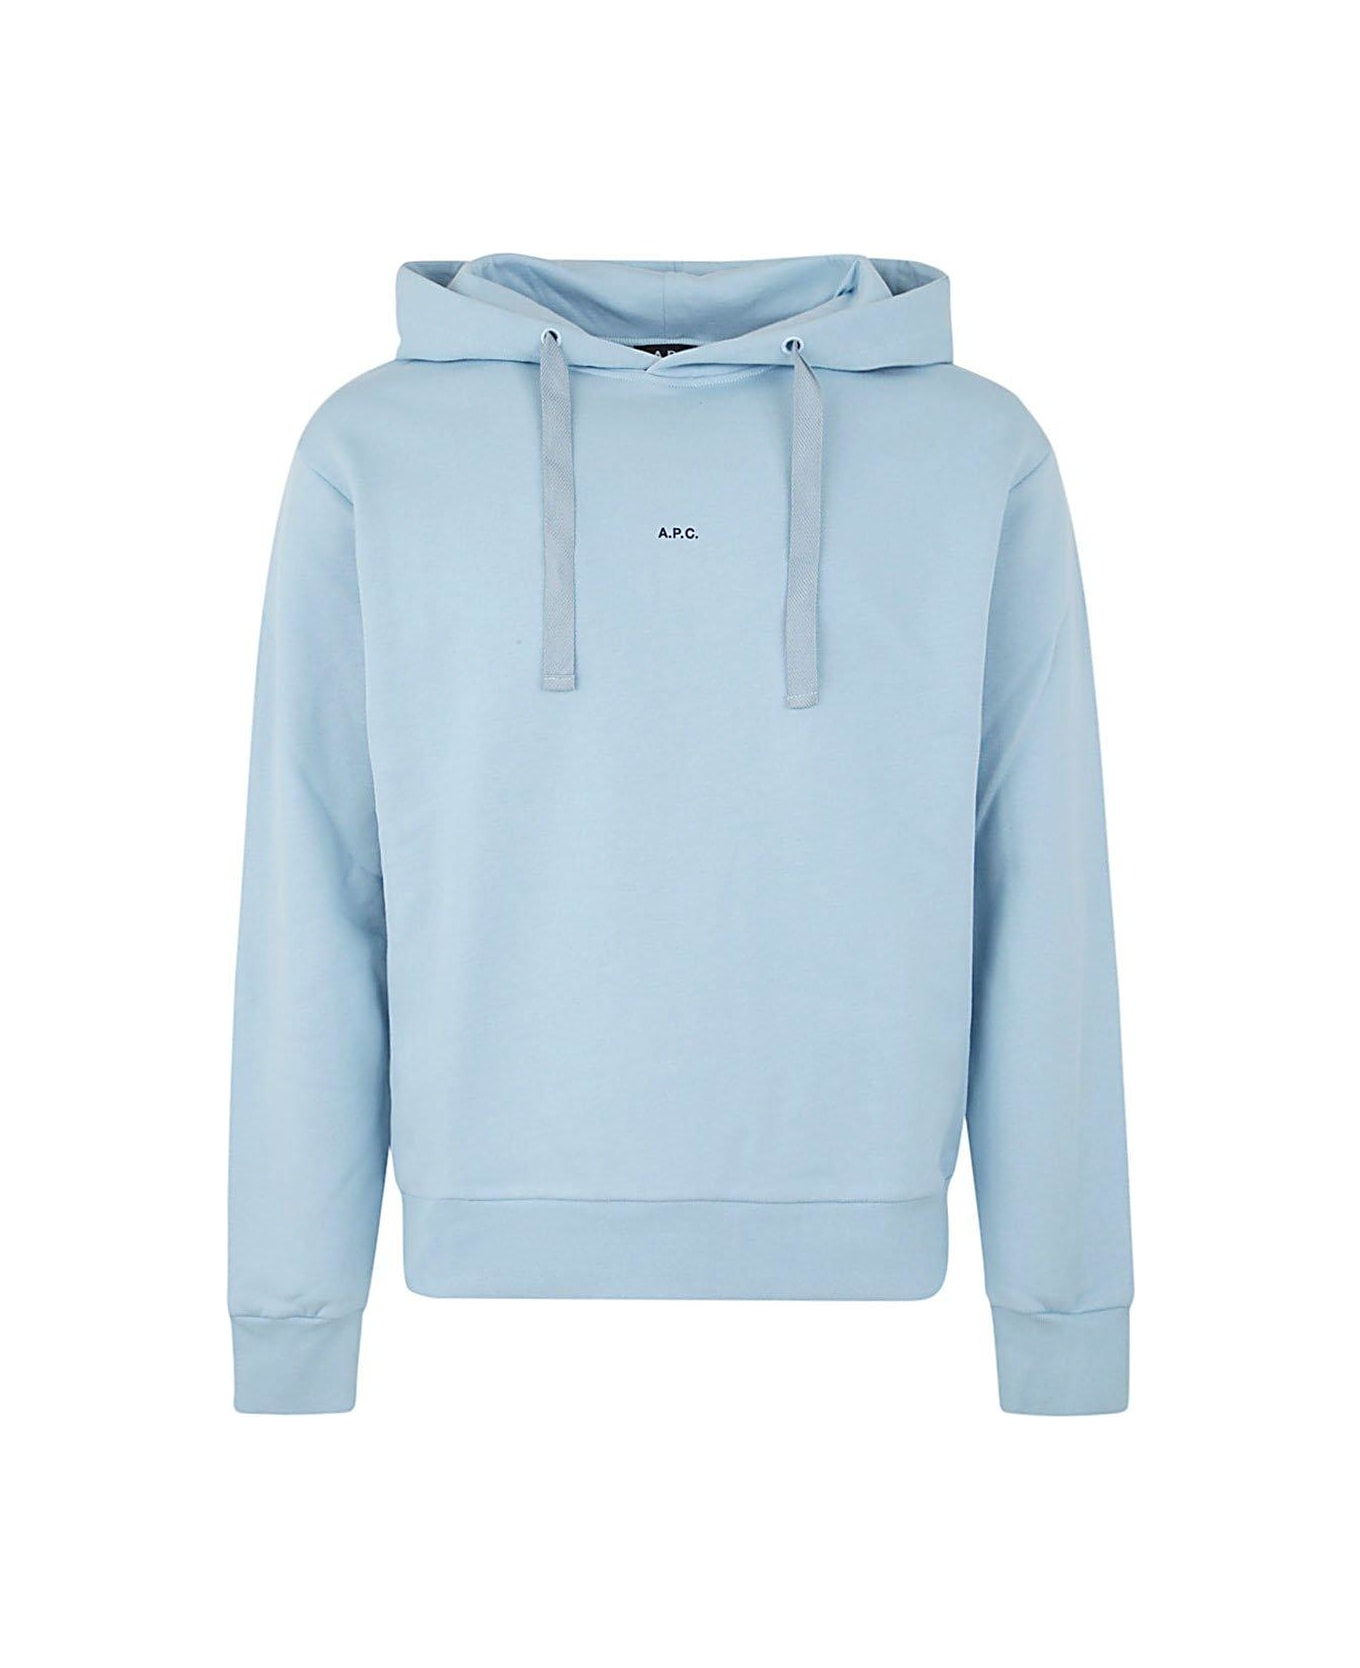 A.P.C. Logo Embroidered Drawstring Hoodie - LIGHT BLUE